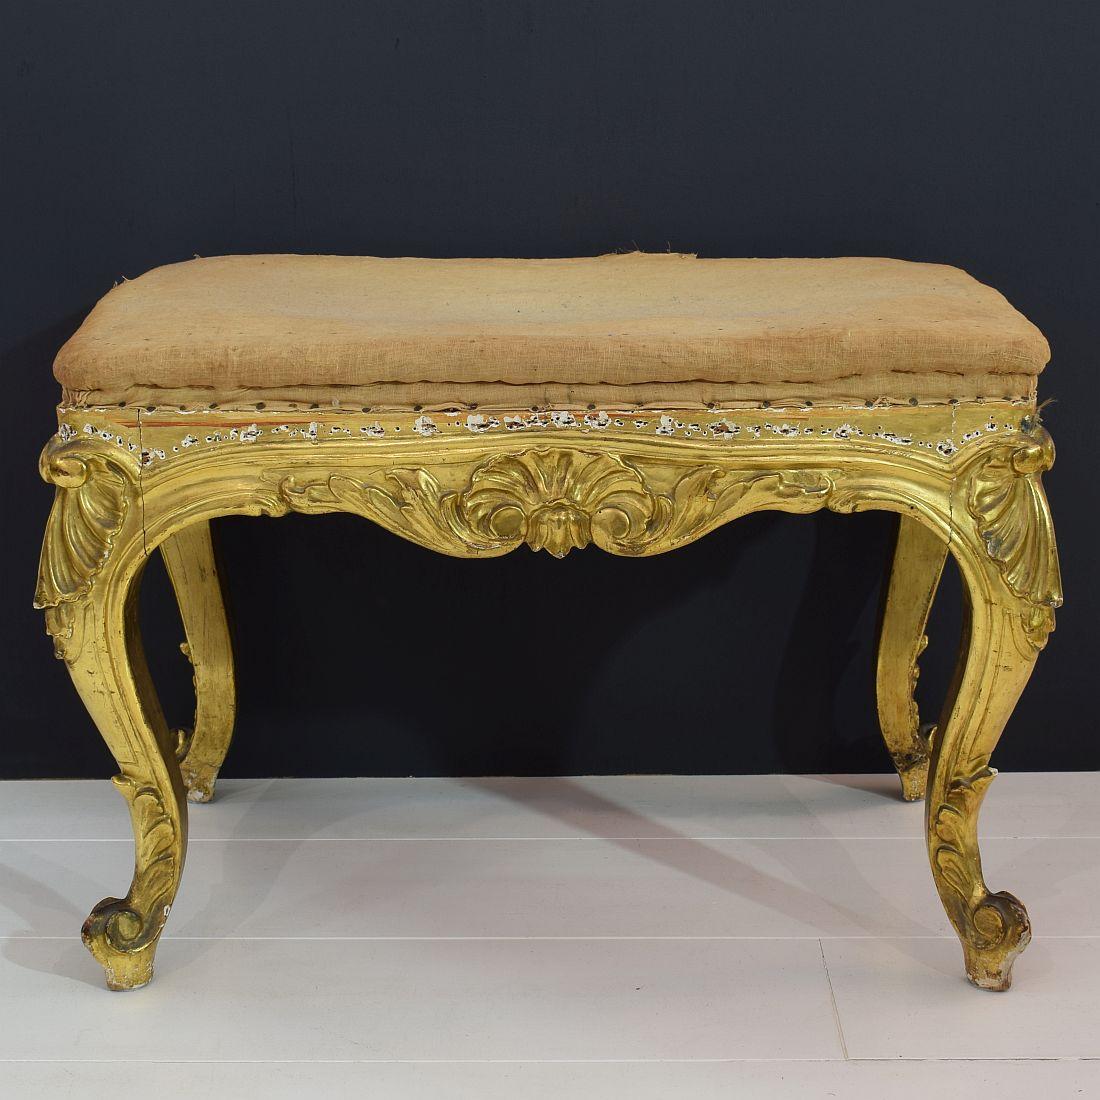 Rococo 19th Century Spanish Gilded Louis XVI Style Carved Stool or Tabouret